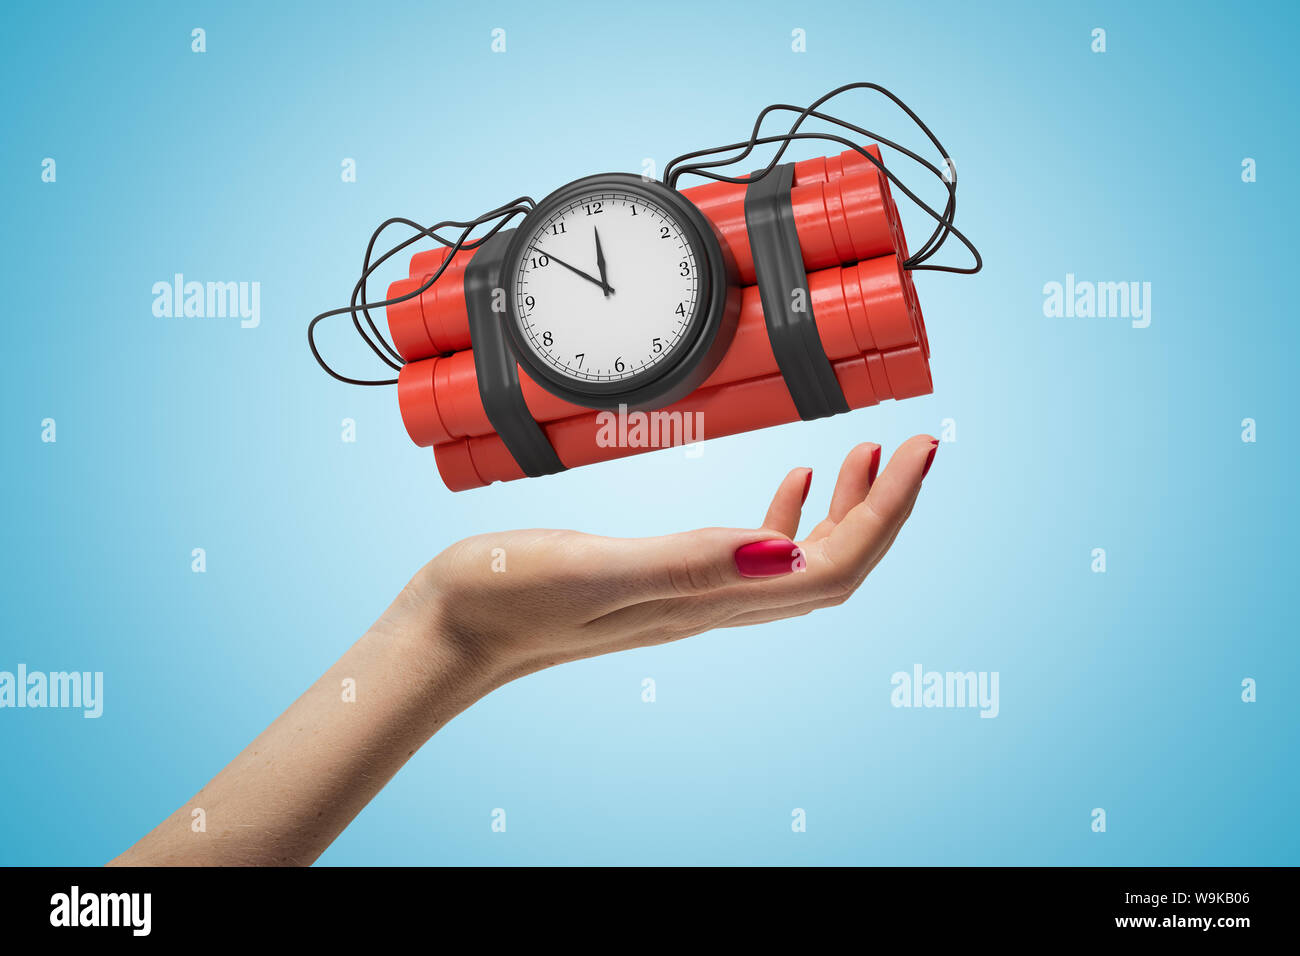 Female hand holding red dynamite stick time bomb on blue background Stock Photo